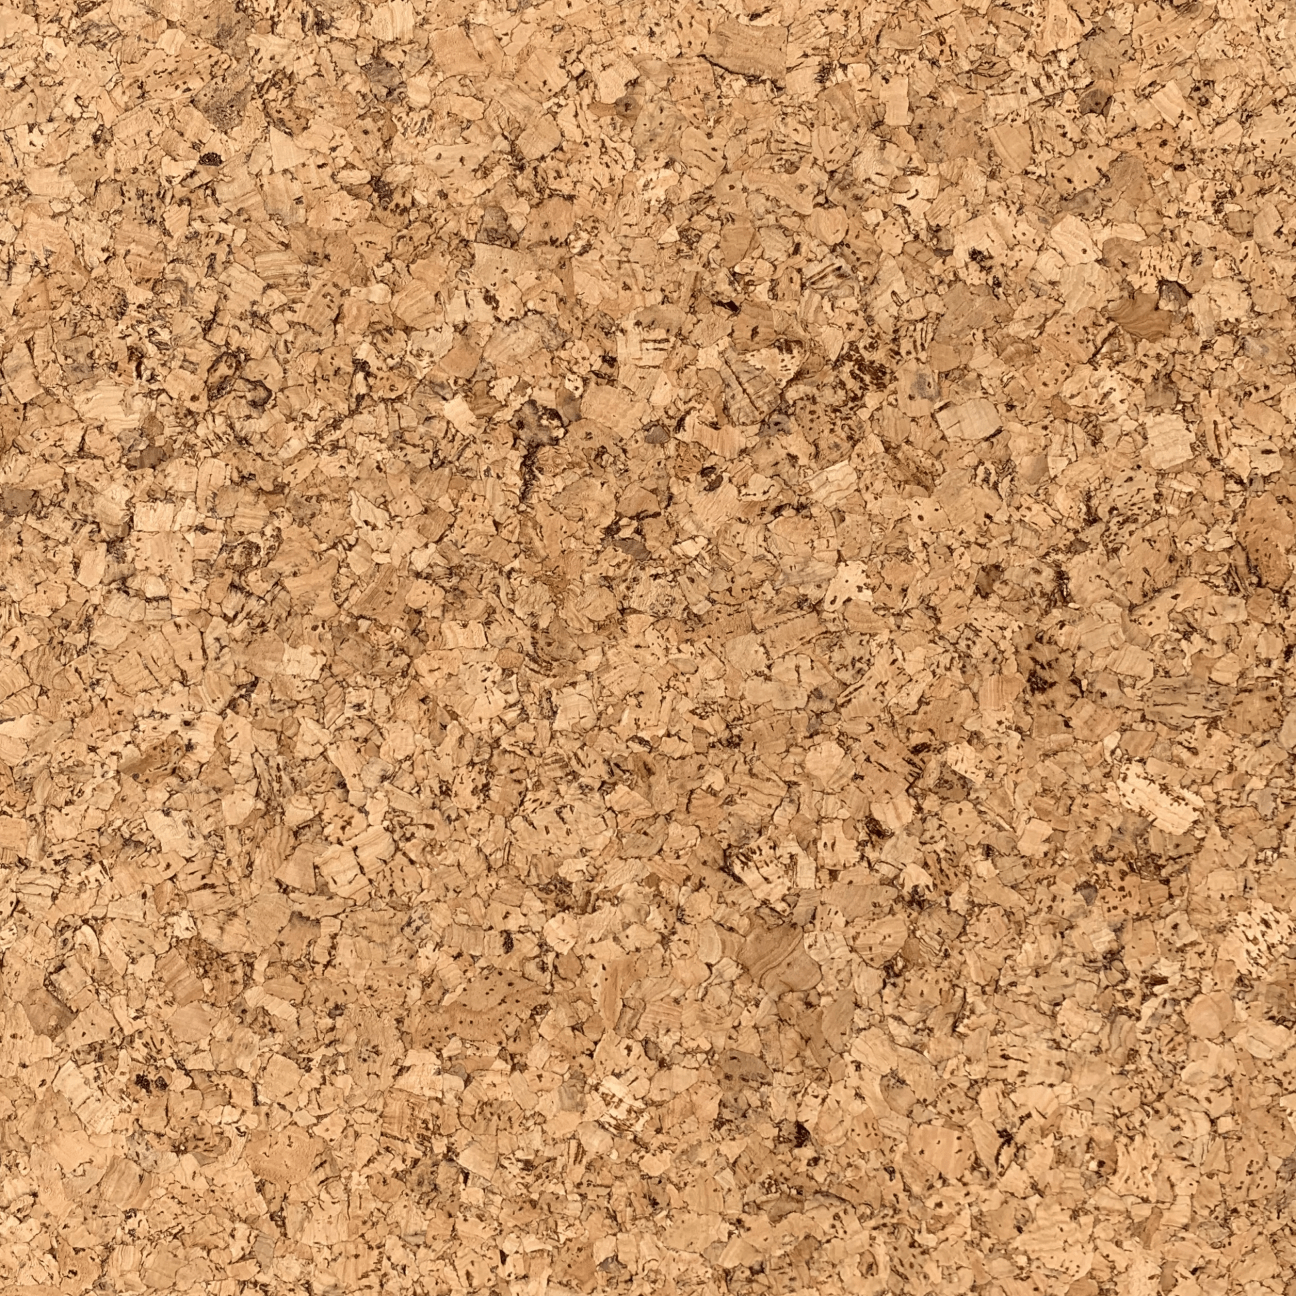 Natural Cork - Sheets, Cut Pieces and Rolls